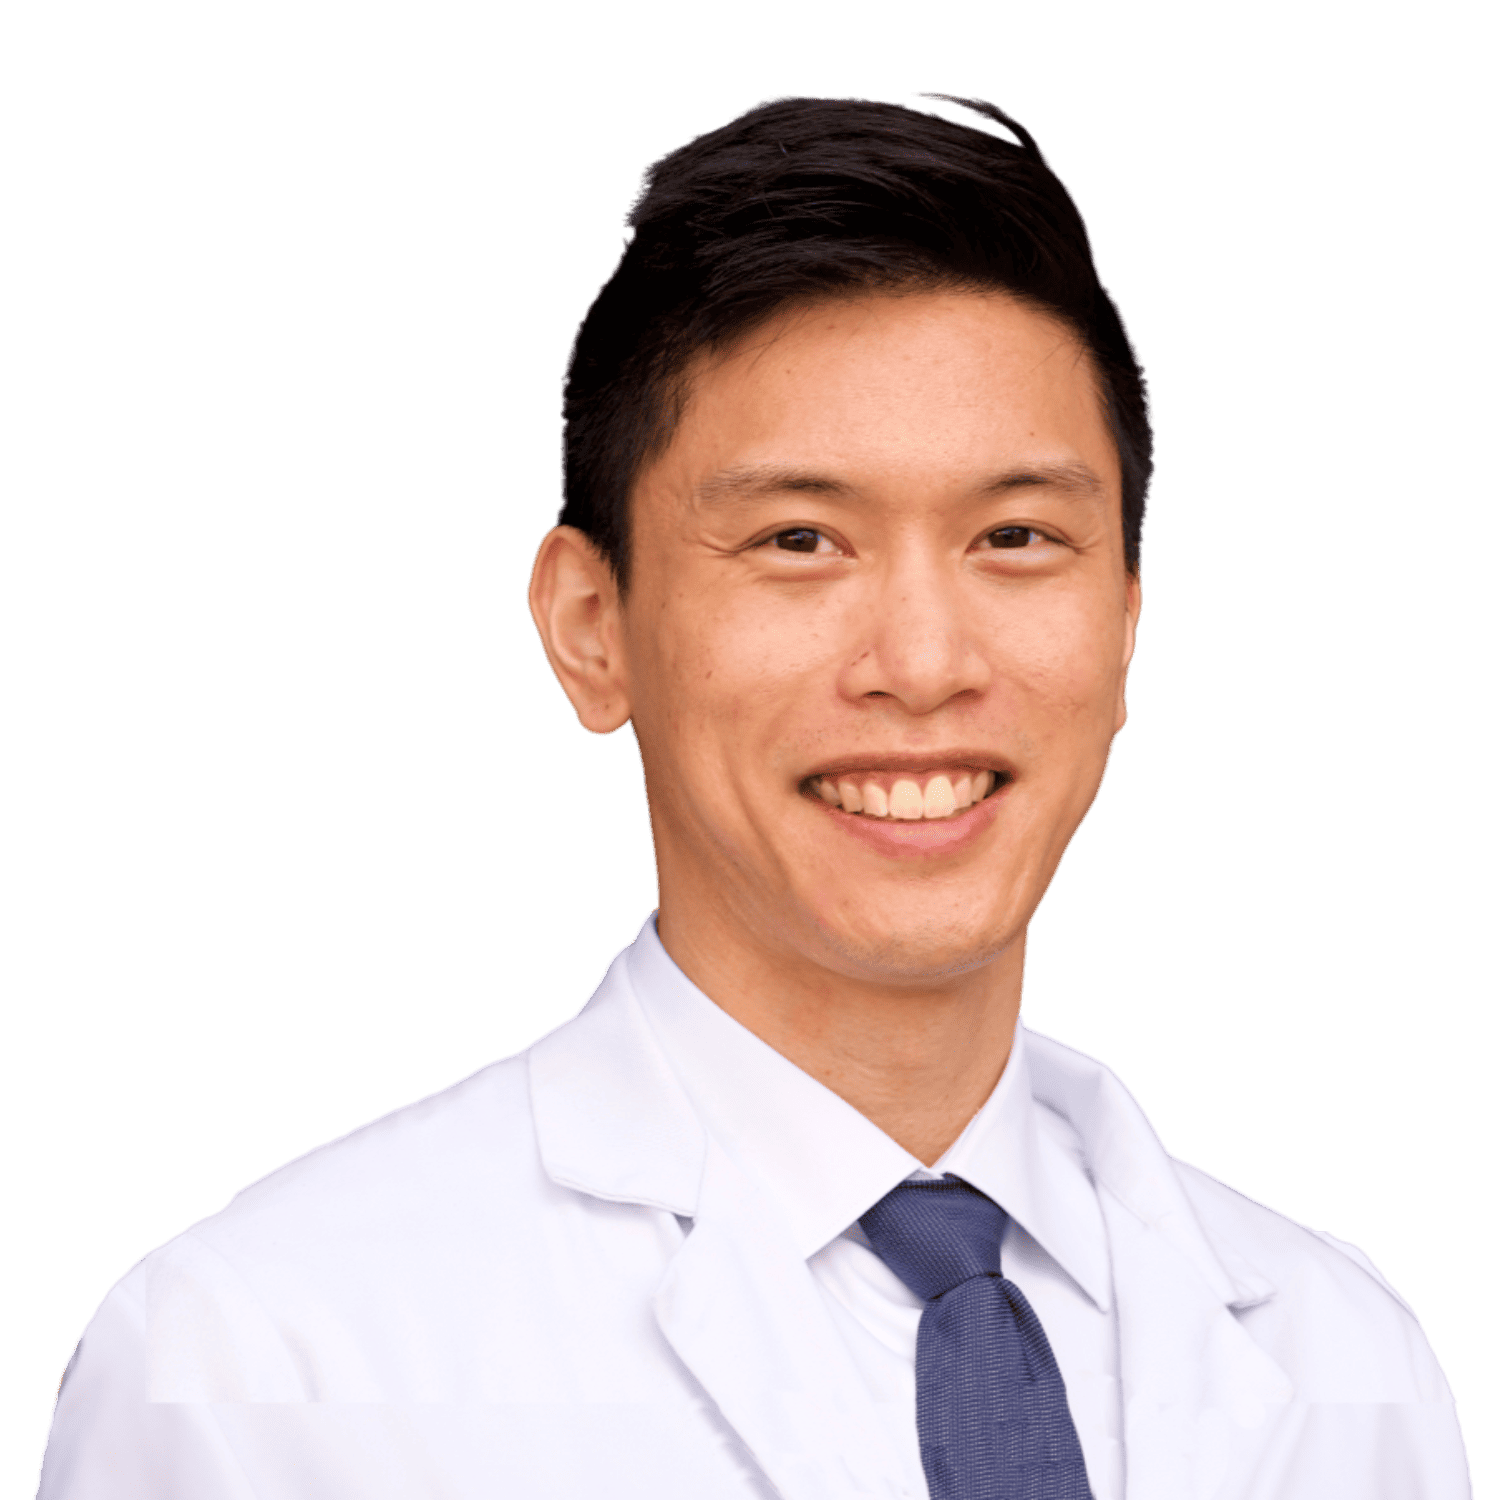 Christopher B. Le, MD